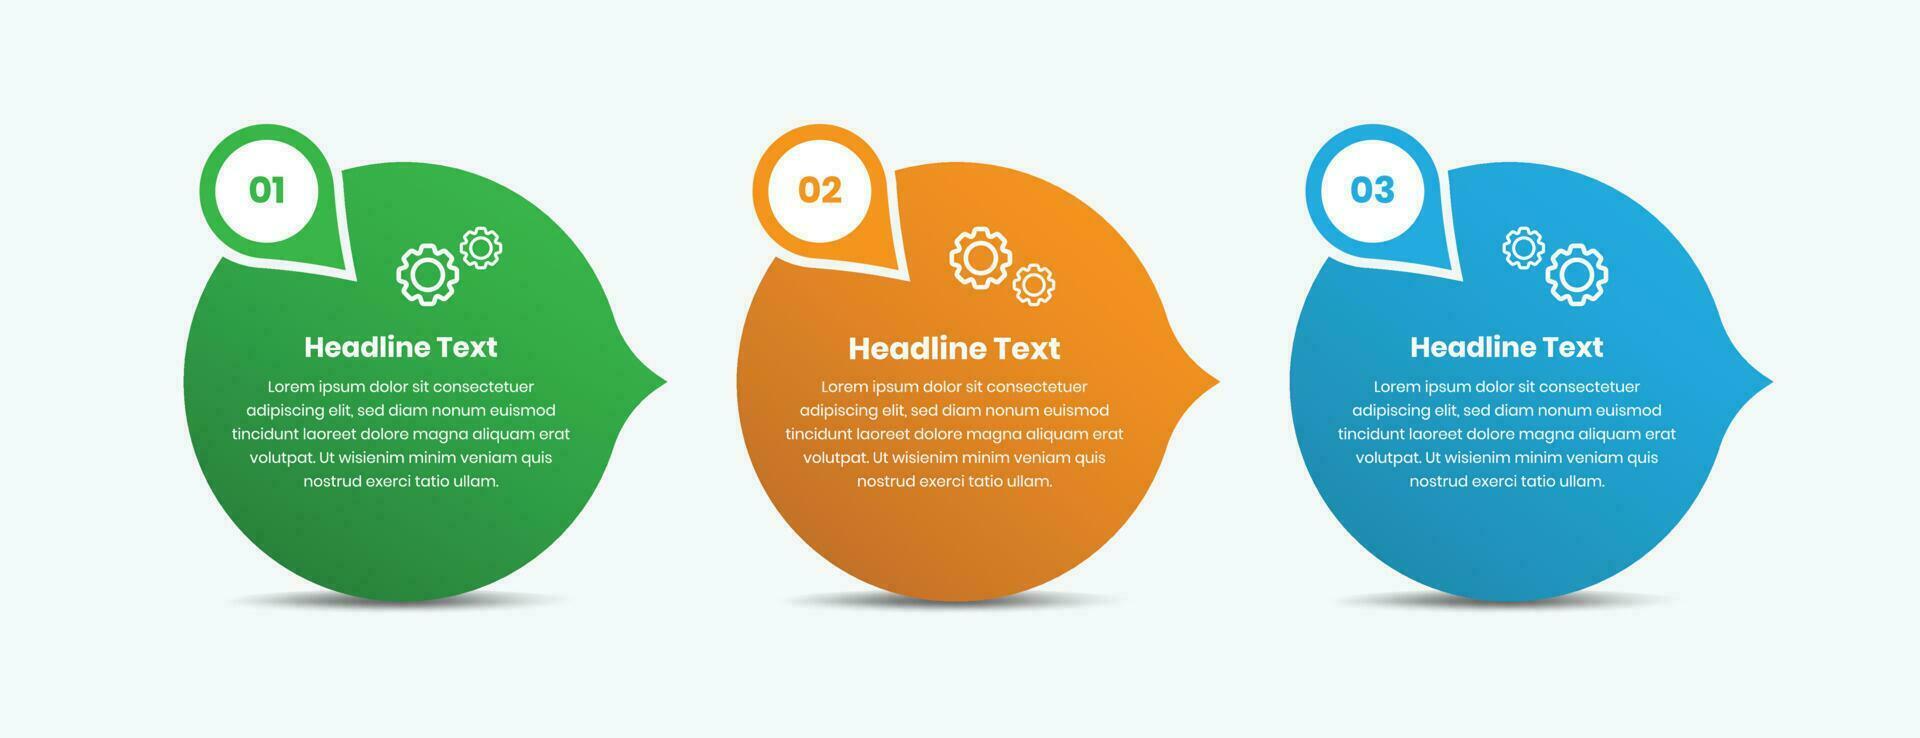 Minimalistic infographic text presentation in abstract oval shape vector